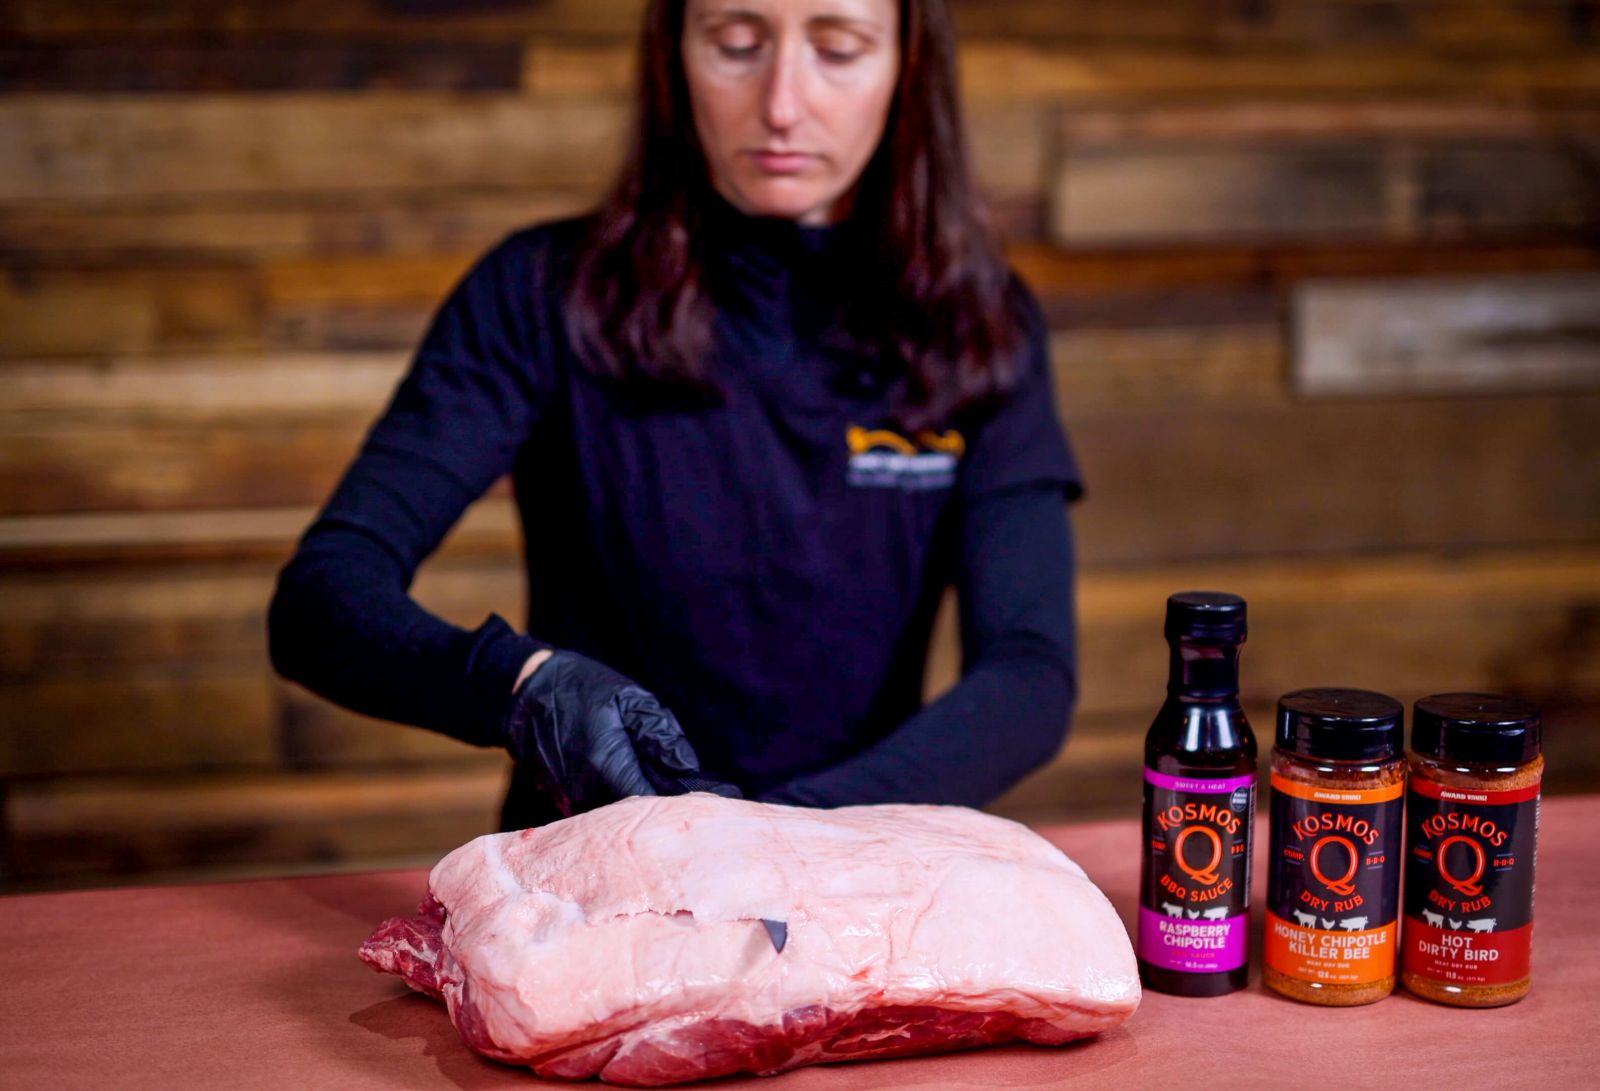 This image shows the fat of the pork being trimmed